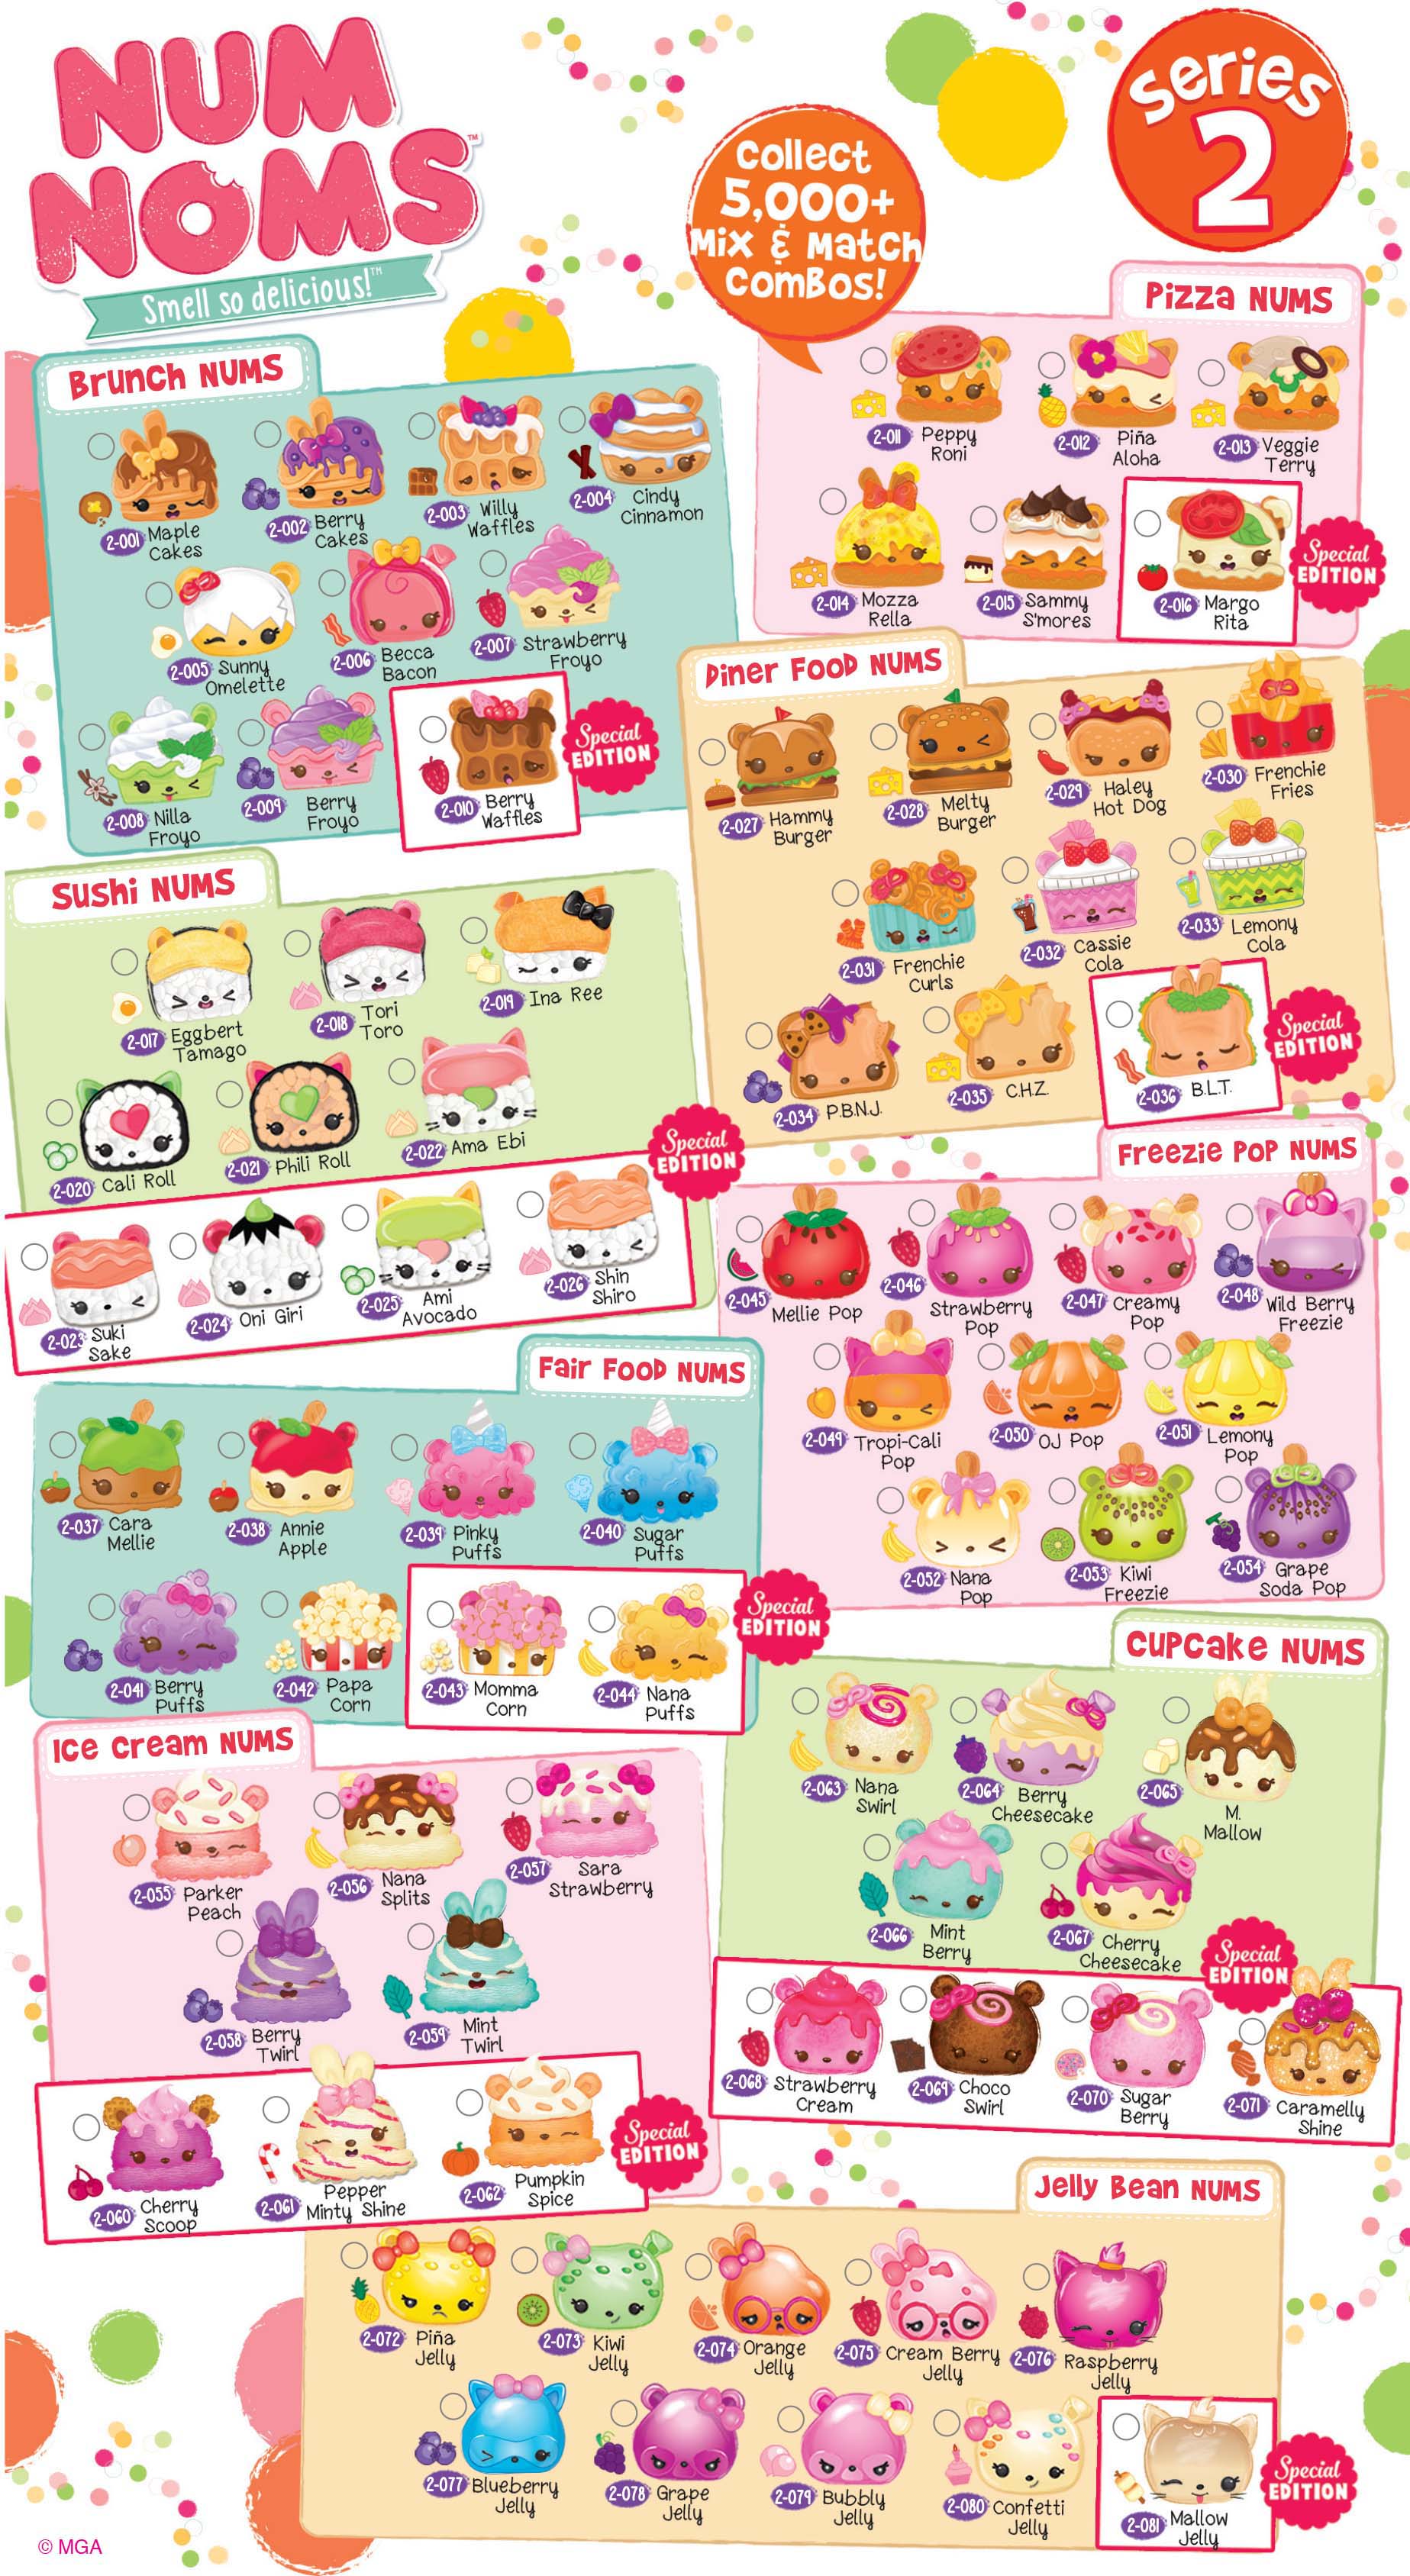 Num Noms Collector's Guide